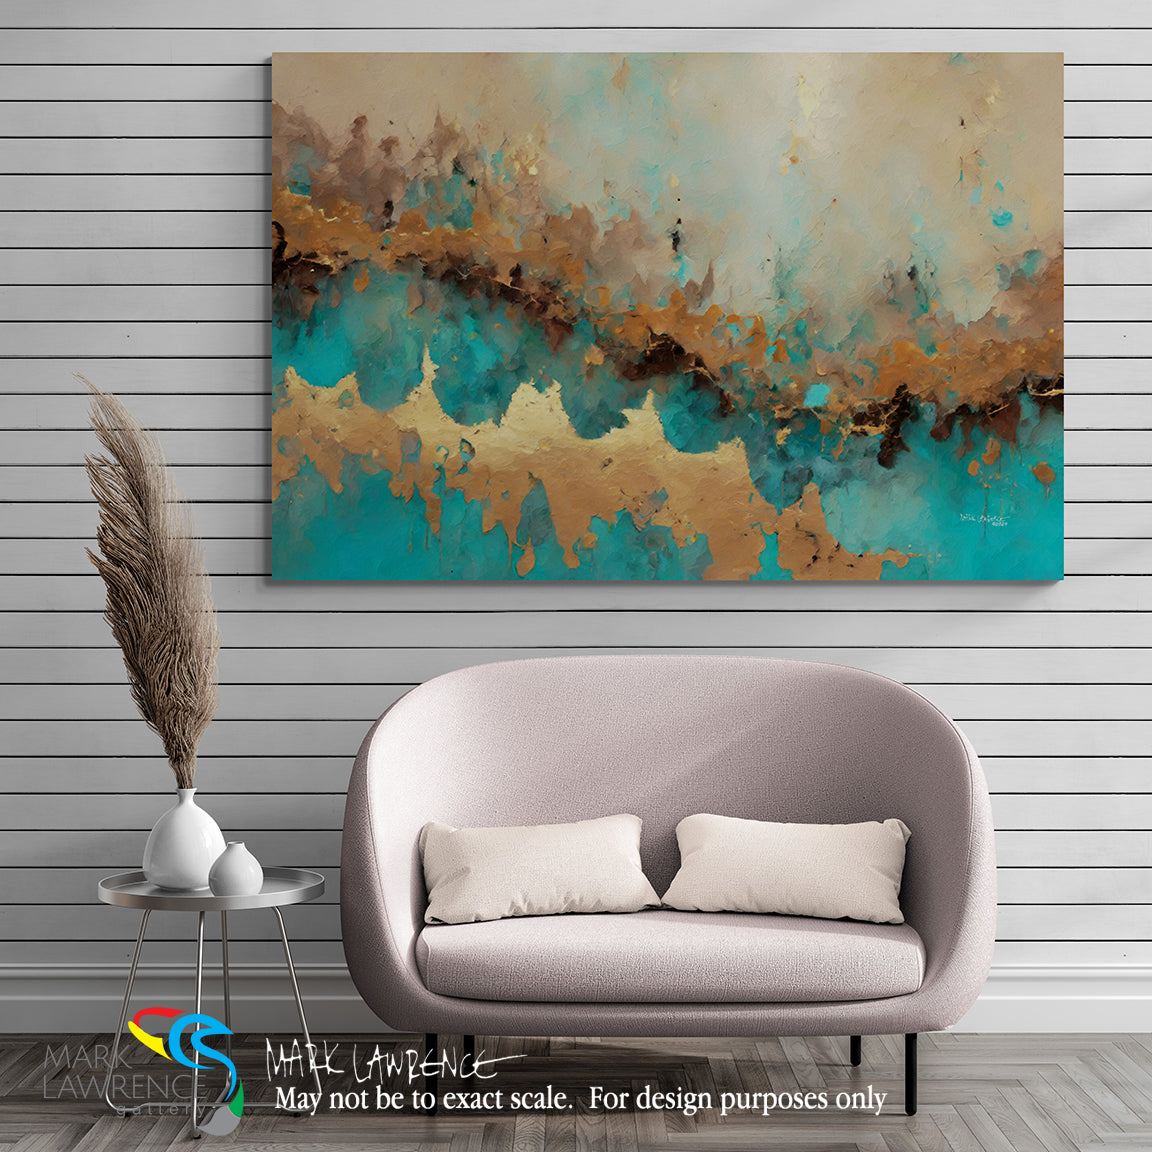 Interior Designer Inspiration- Mark 16:15. Spread the Good News. Limited Edition Christian Modern Art. Hand embellished & textured giclee paintings with bold brush strokes by the artist. Signed & numbered. Museum quality on canvas wall art. And He said to them, “Go into all the world and preach the gospel to every creature.